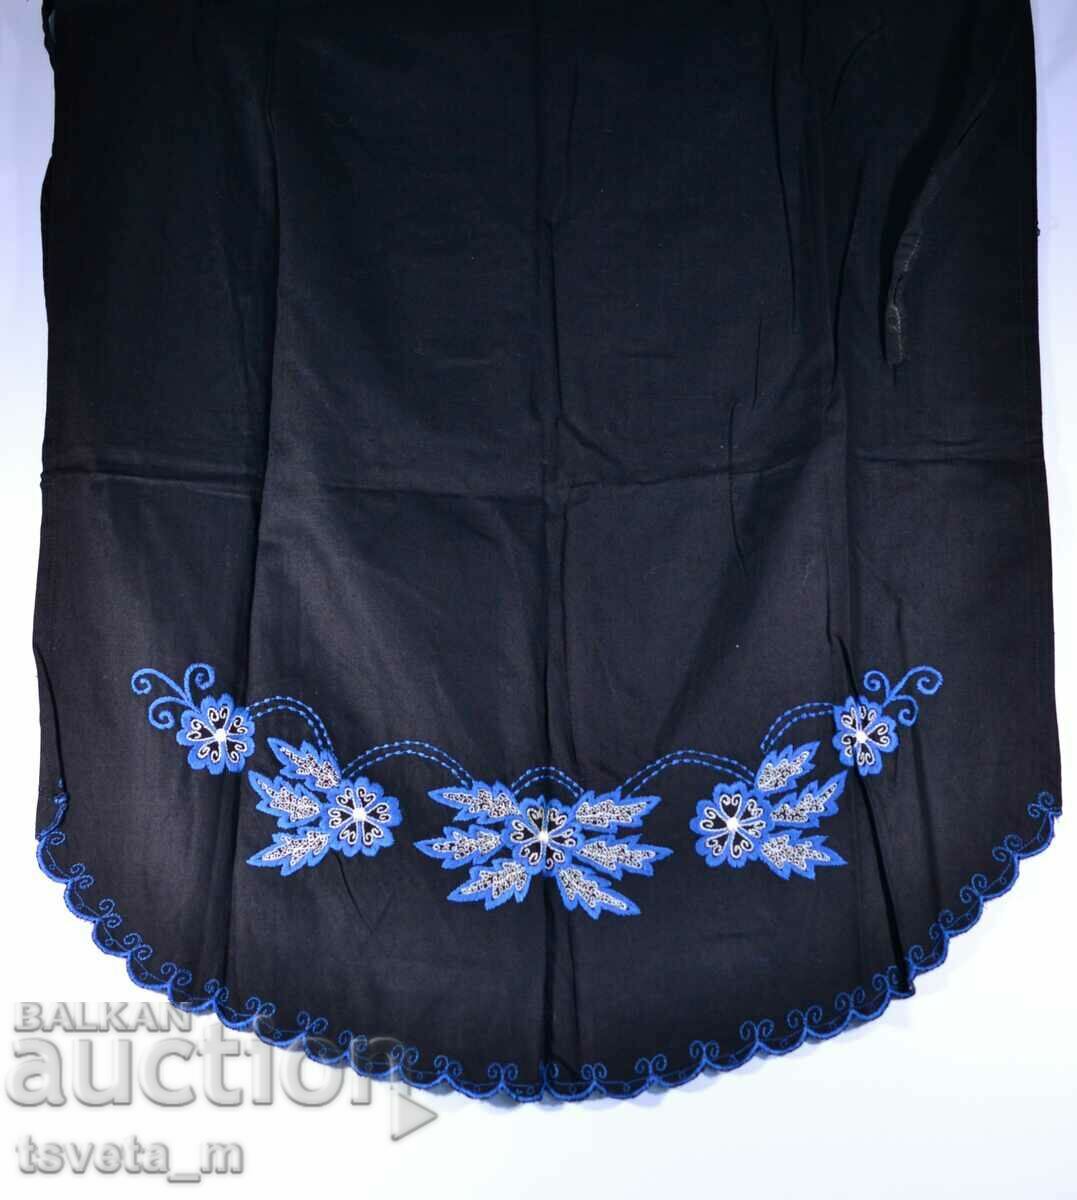 COTTON APRON FOR FOLK COSTUME WITH HAND EMBROIDERY